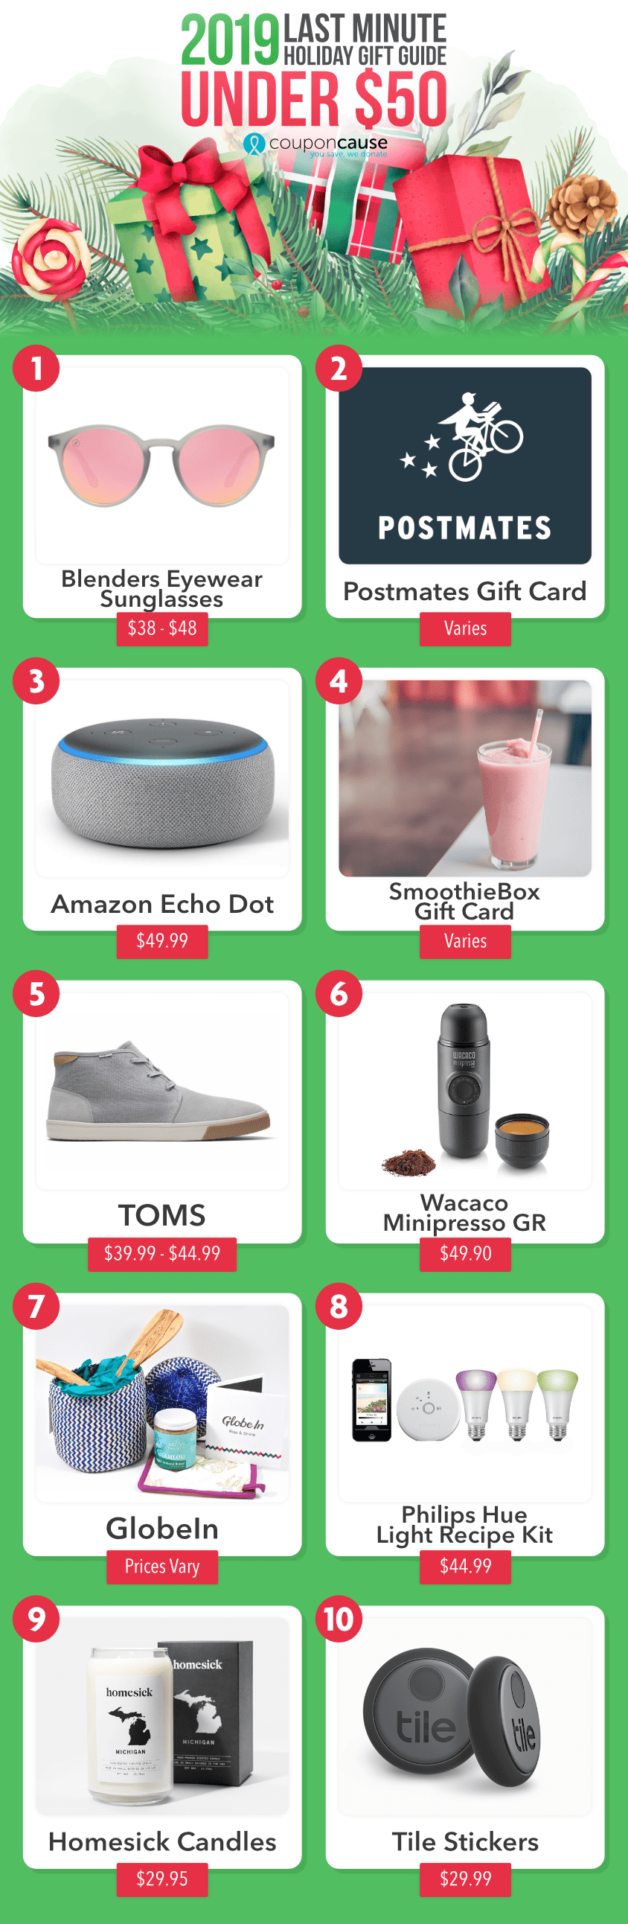 CouponCause 2019 Last-Minute Holiday Gift Guide Under $50